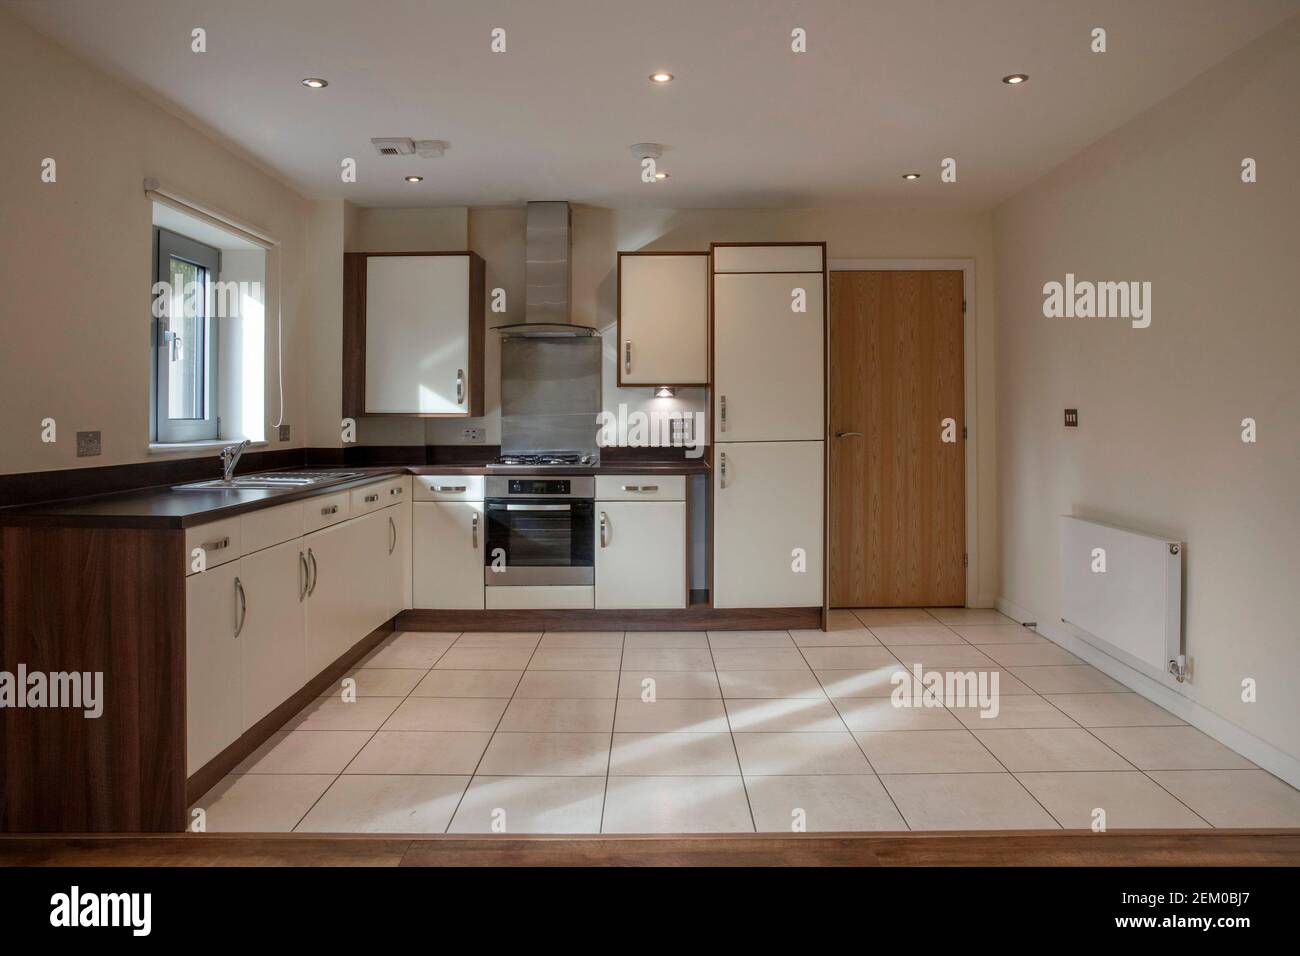 View of a kitchen area in a modern open plan apartment living area Stock Photo